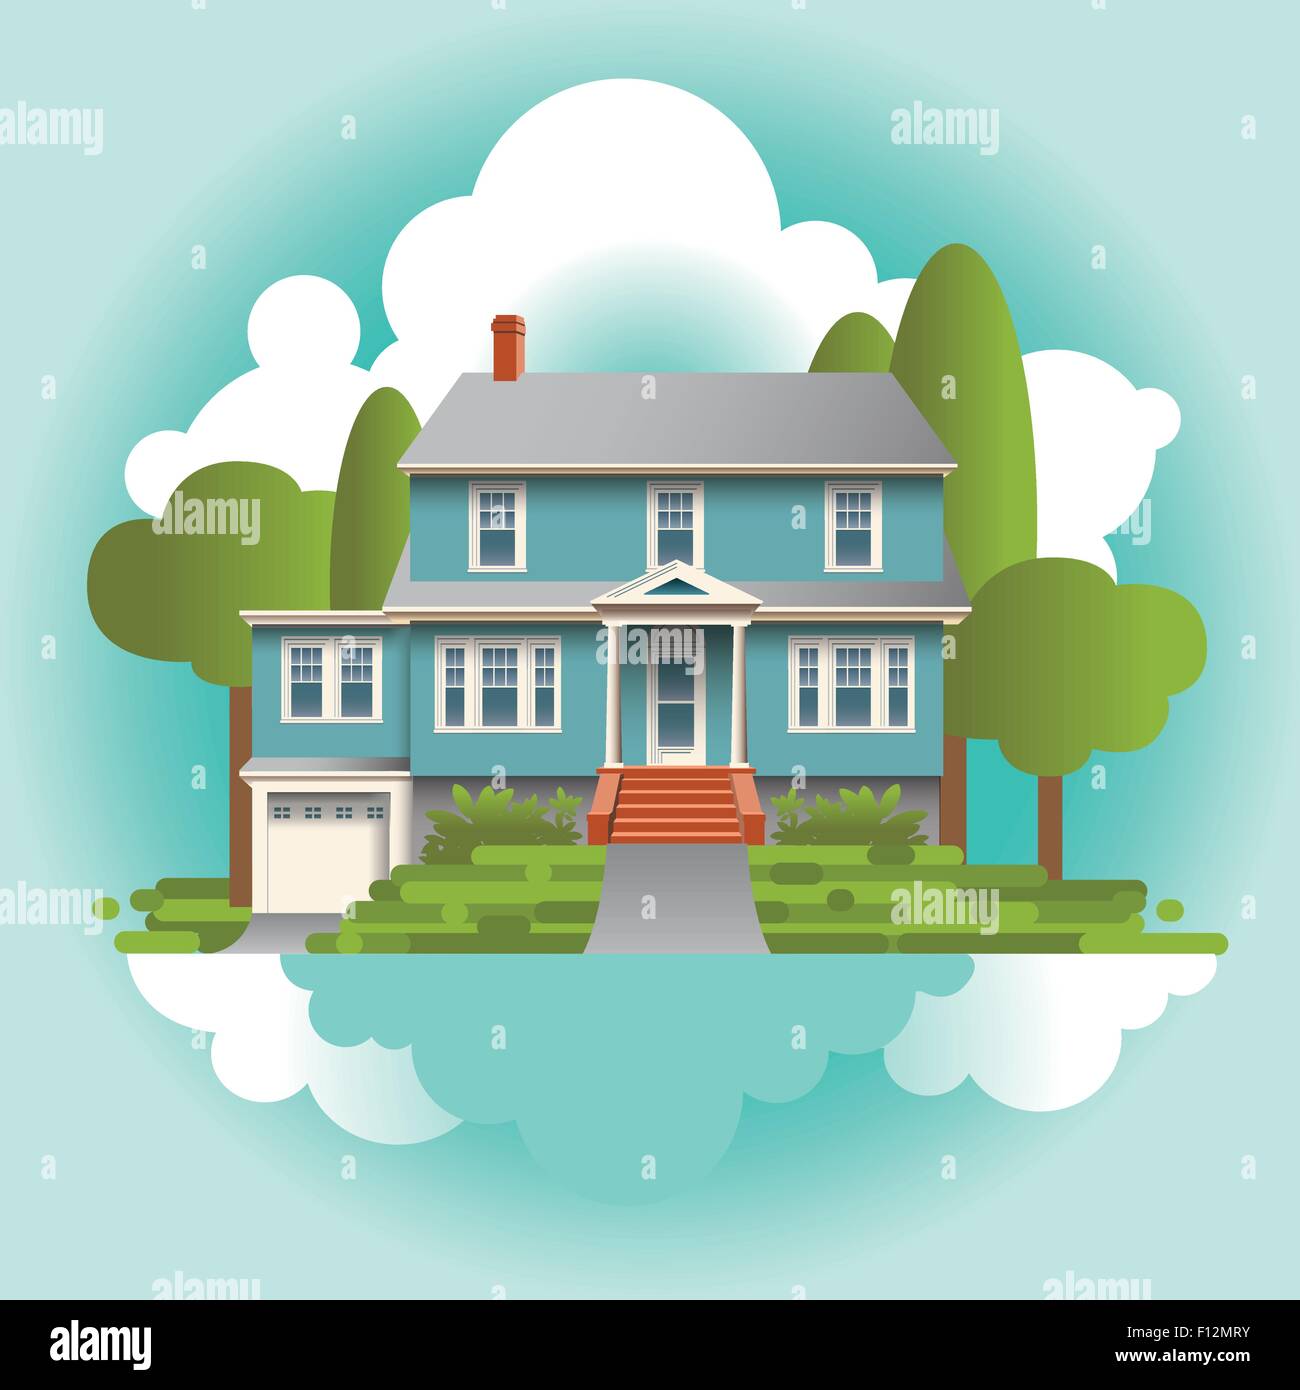 A Stylized Quaint Home in the Suburbs Stock Vector